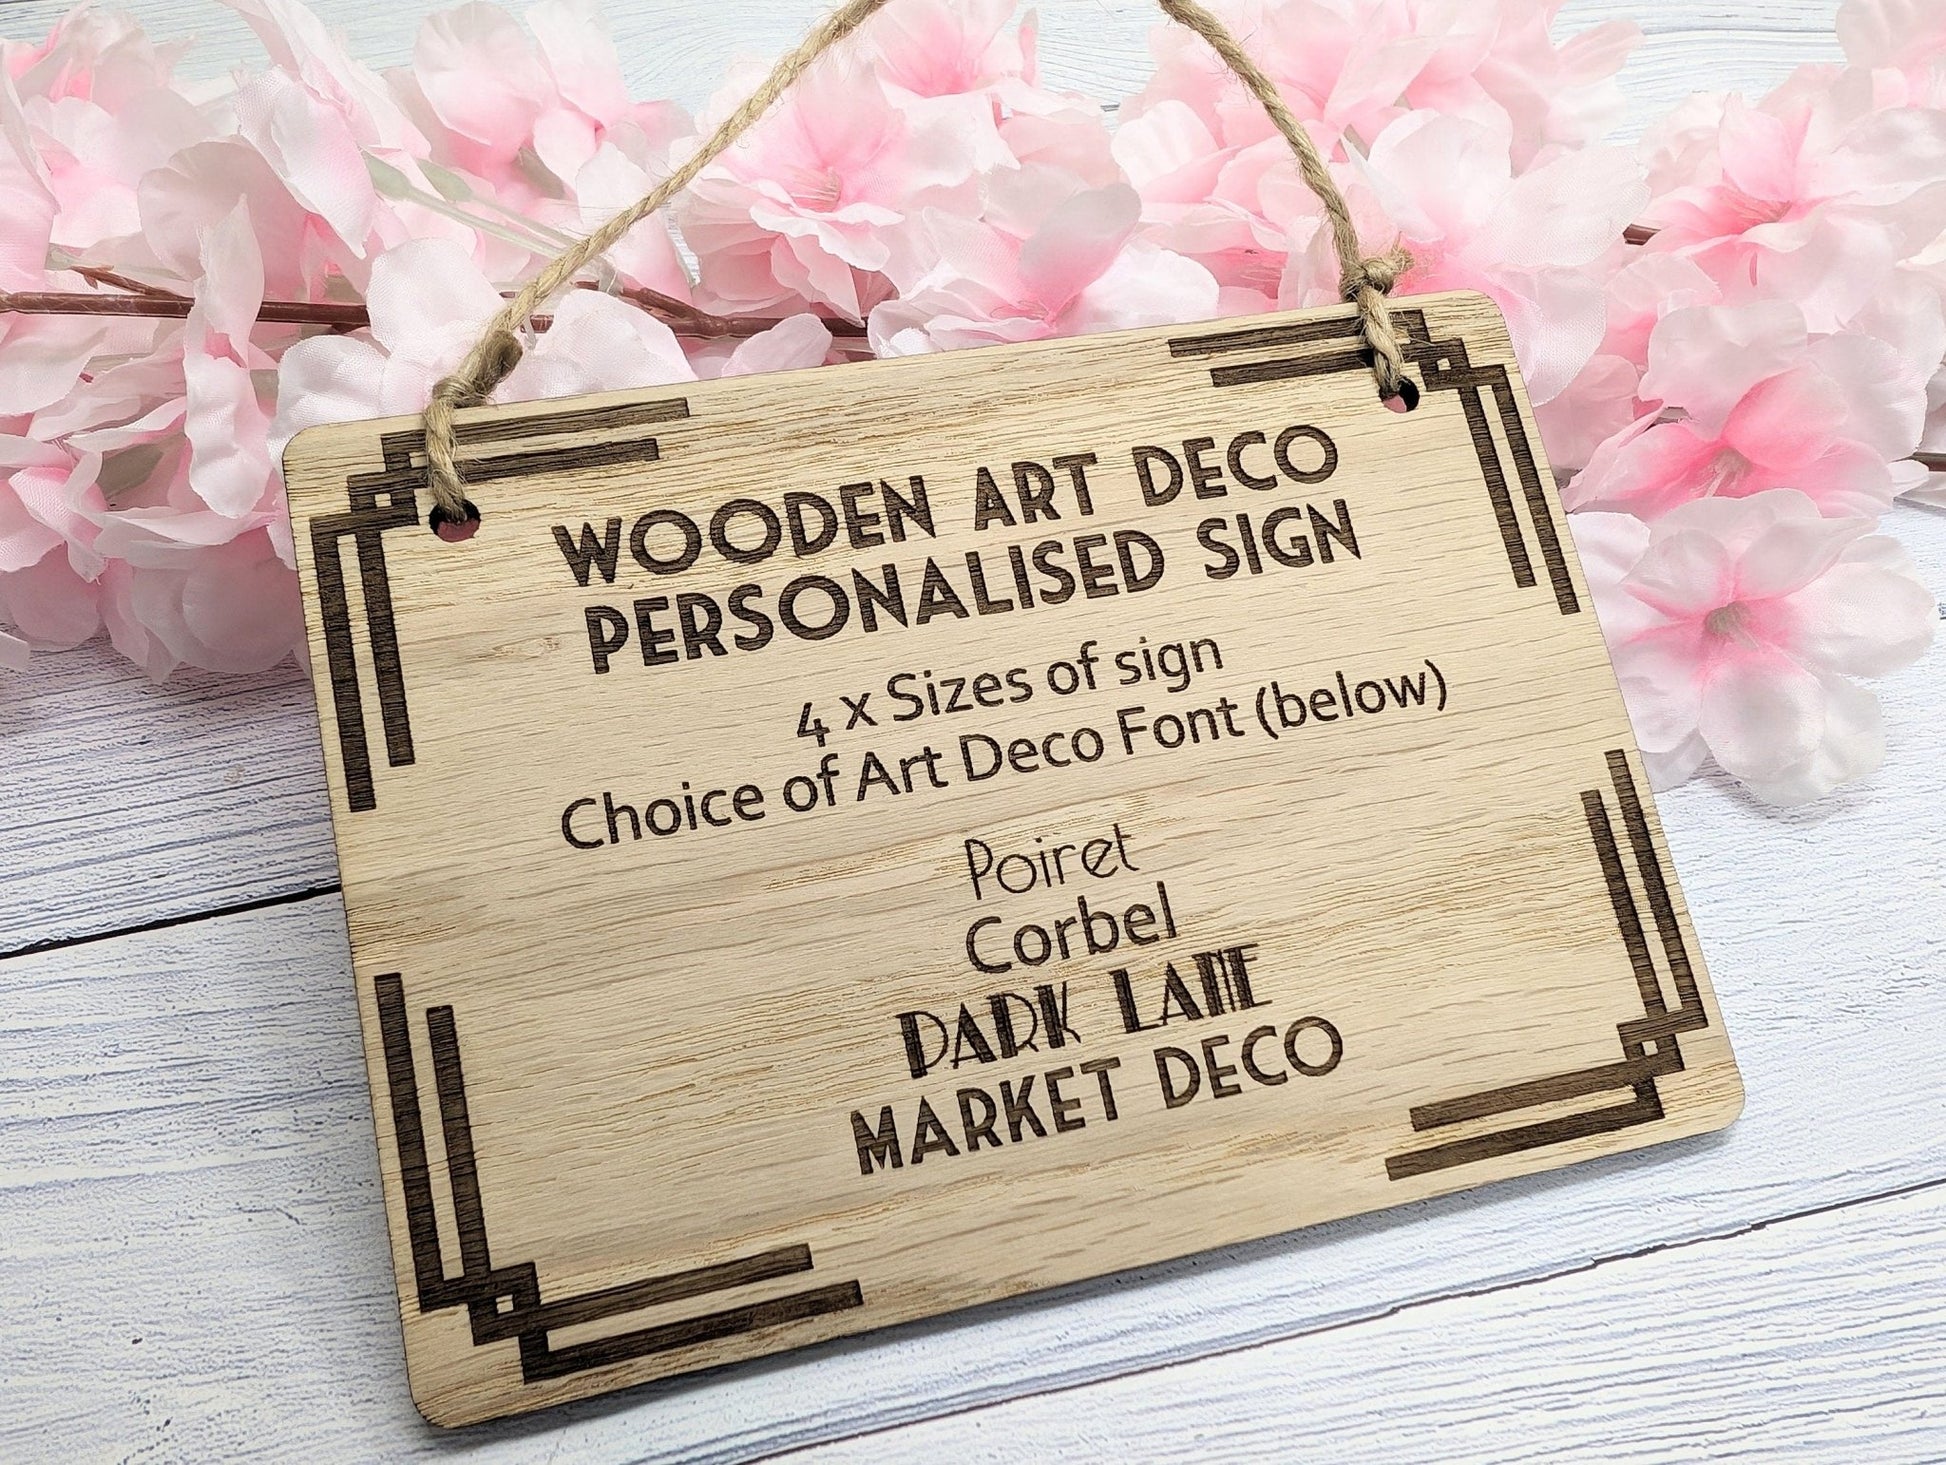 Art Deco Bespoke Text Wooden Sign – Select Your Font & Size | Eco-Friendly | Personalised Wall Decor - Ideal for Home, Office, or Business - CherryGroveCraft